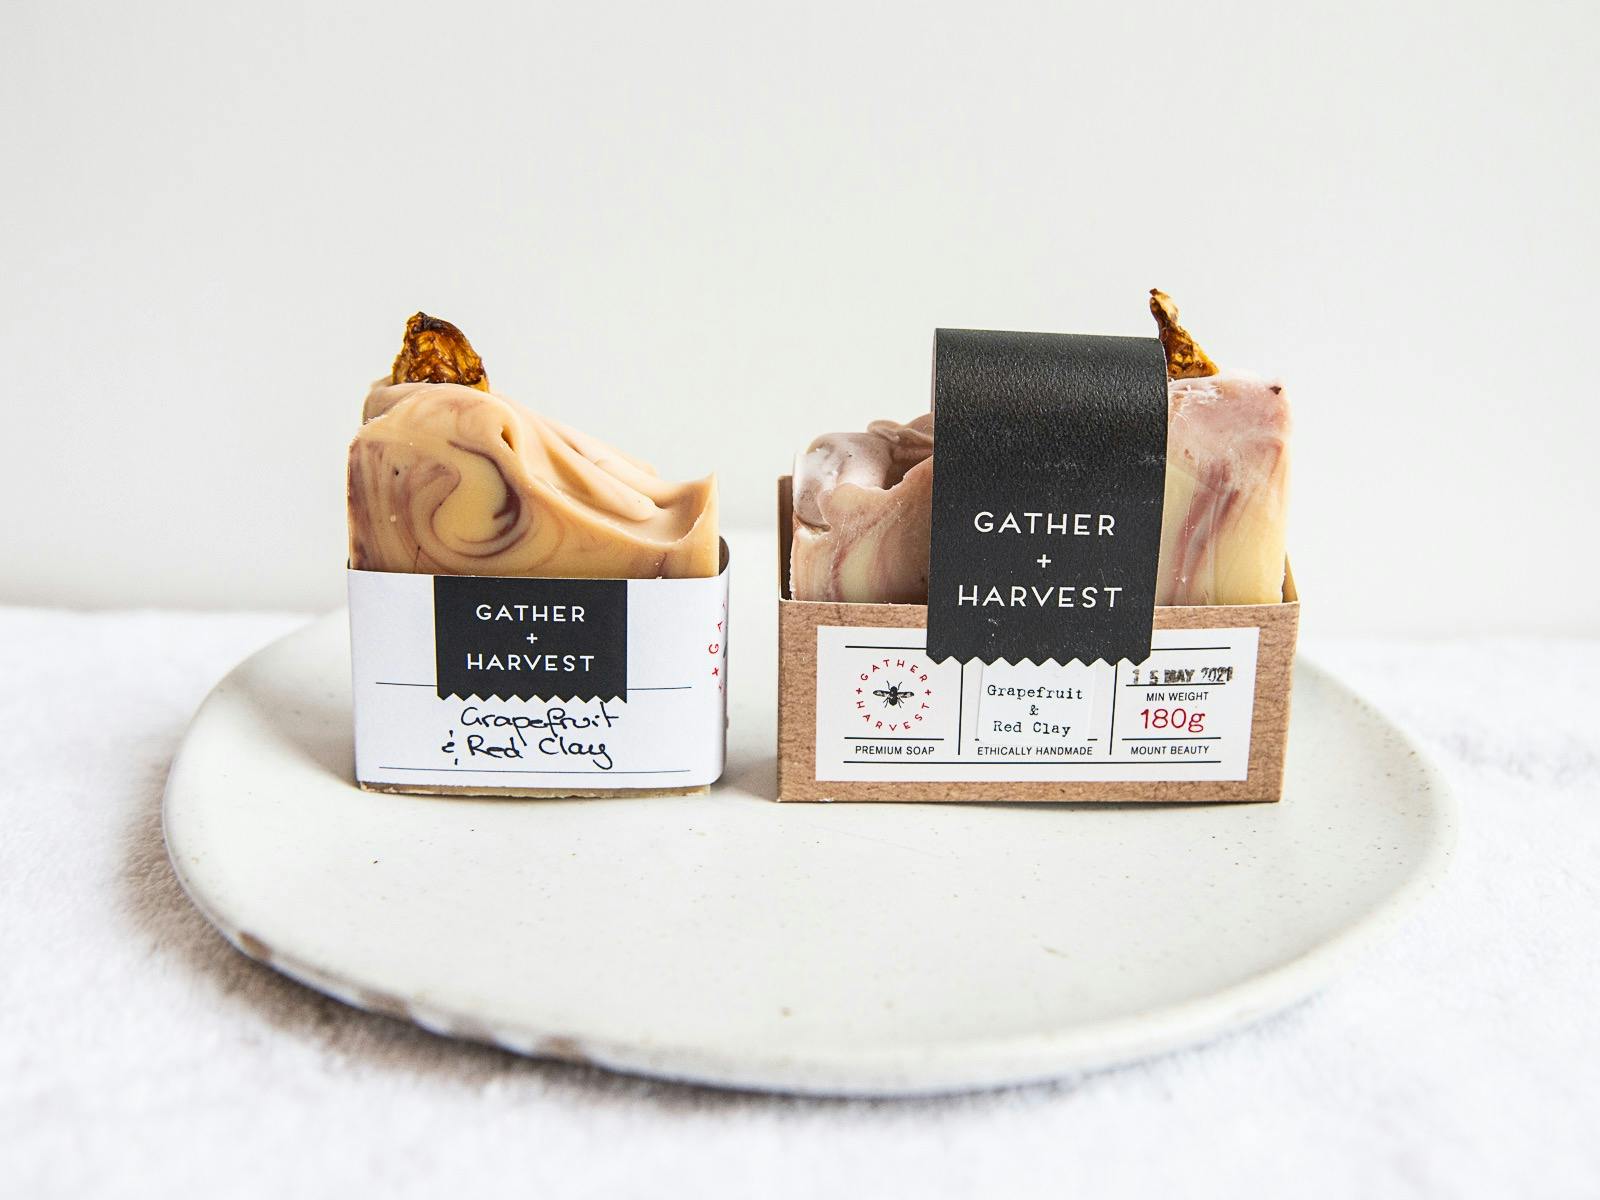 Gather & Harvest handcrafted soap.